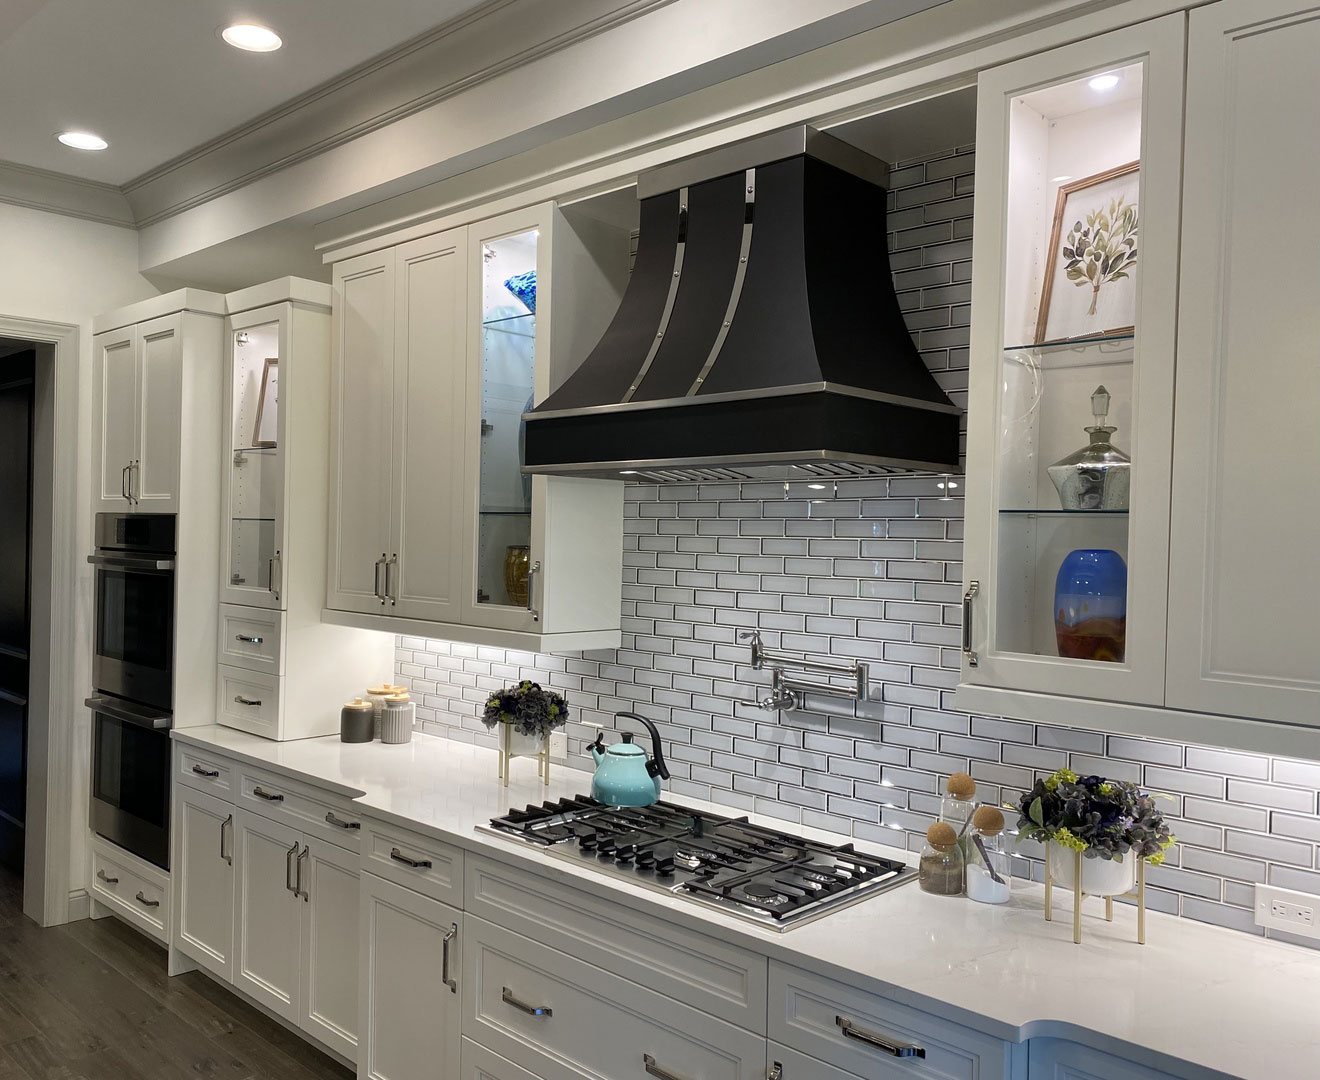 Classic kitchen with white cabinets and countertops, complemented by a brick backsplash sleek range hood, creates a timeless and stylish design